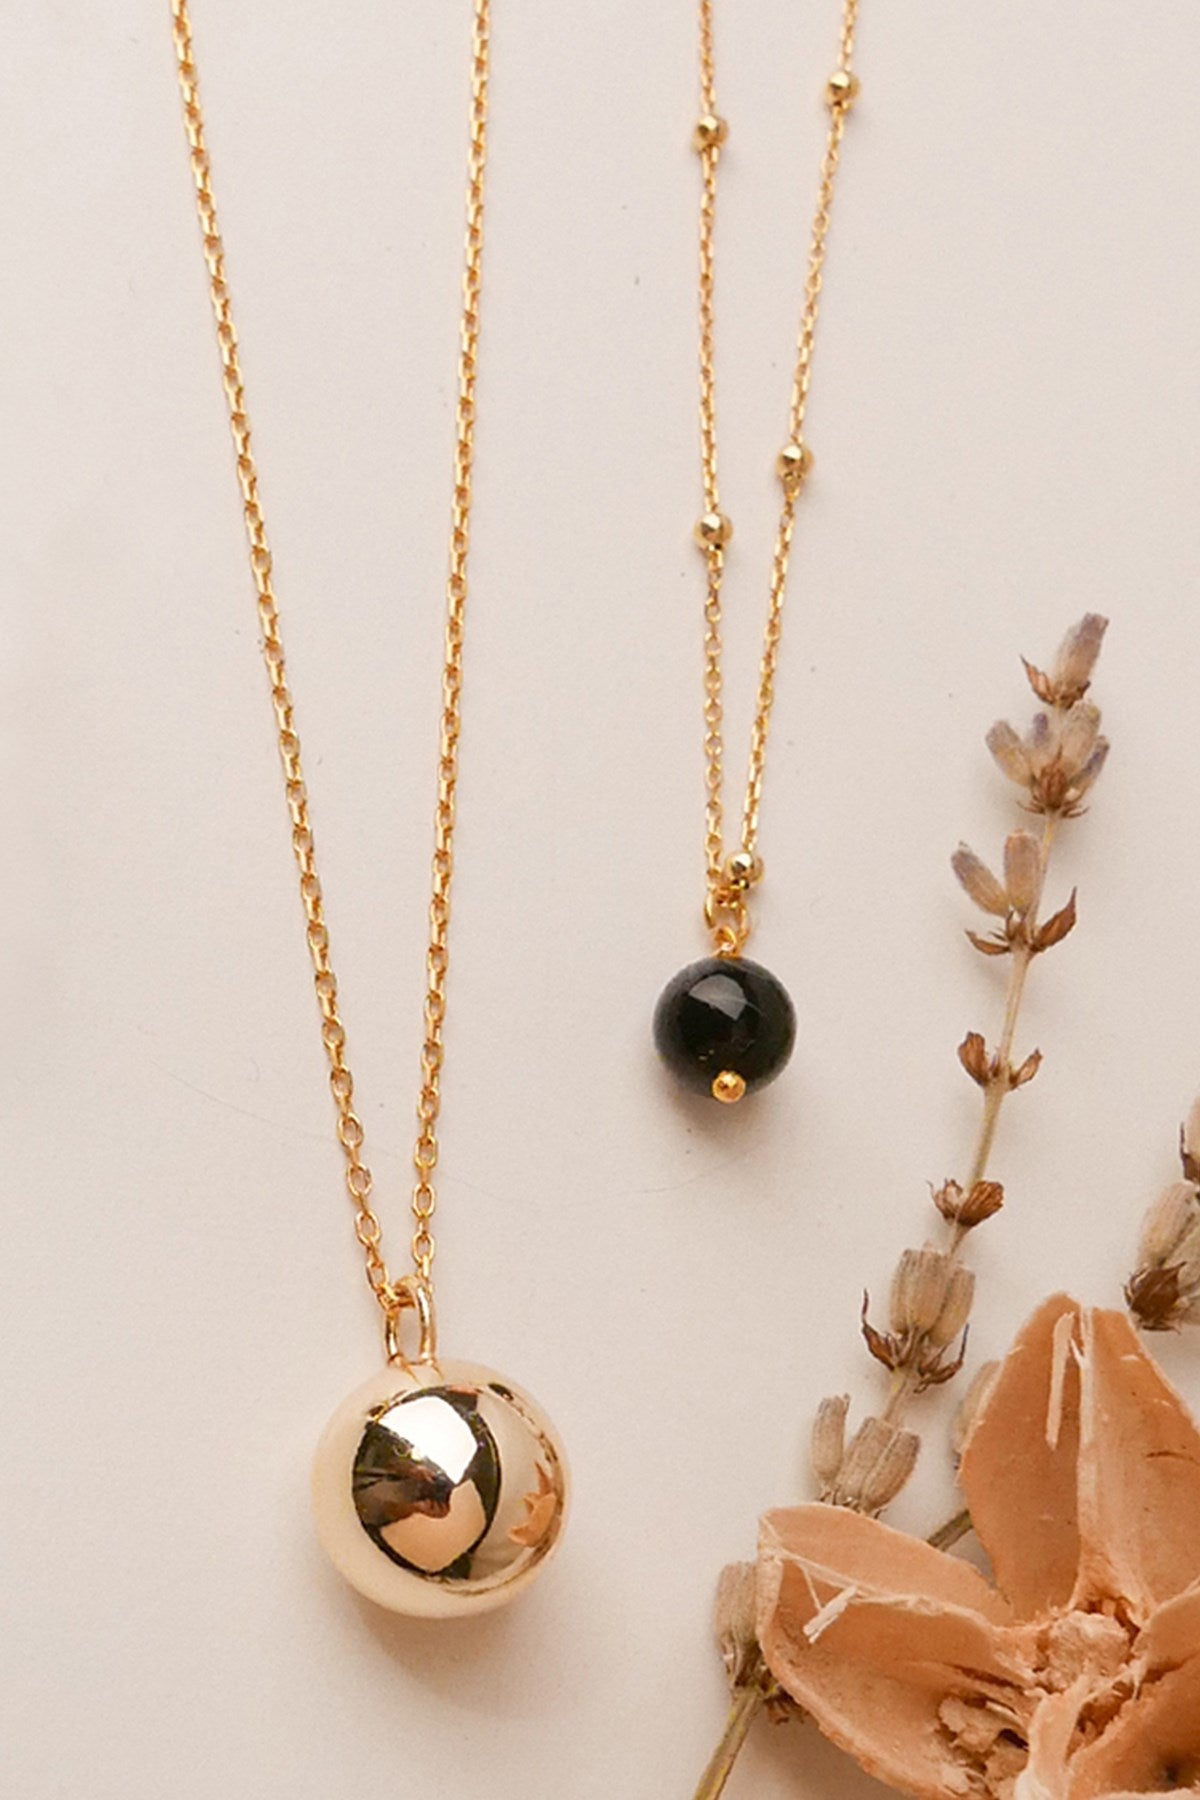 Ball Necklace Gold Plated